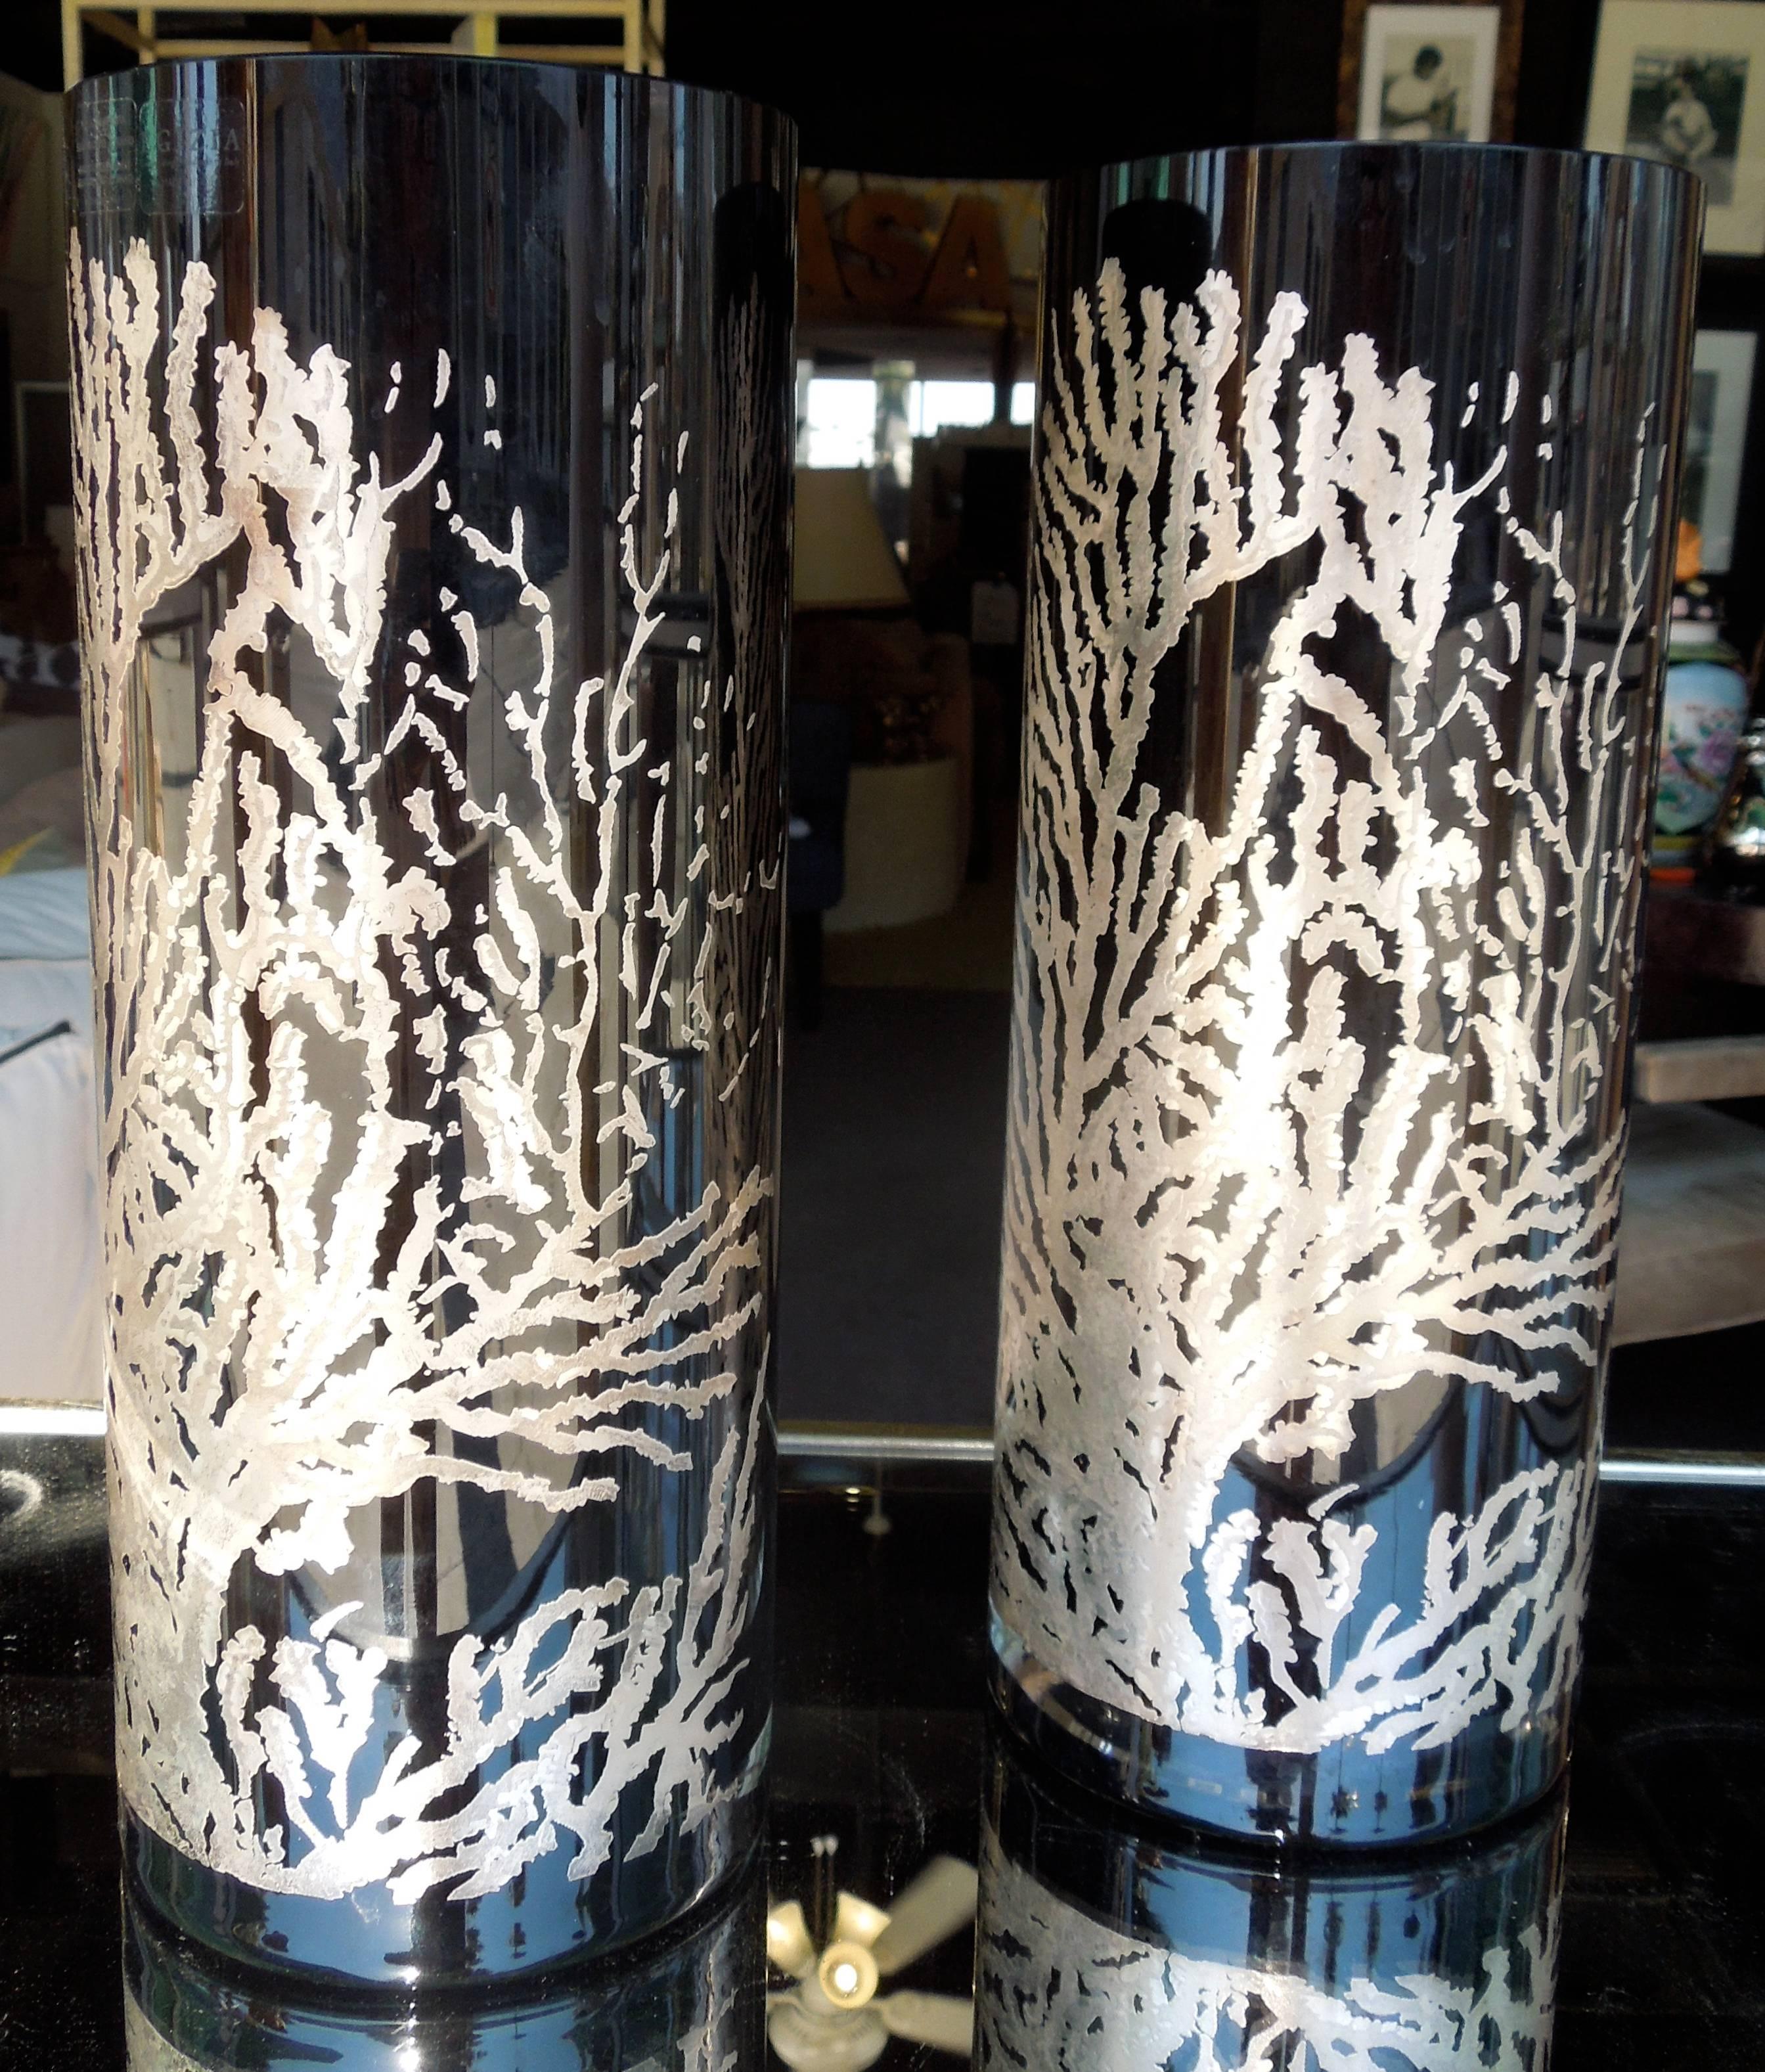 As new from Palm Springs Collector's Display cabinet. These matching pair of modern Italian glass are a work of art! Handmade in Italy by Egizia, this dimensional silver coral art piece were designed by Ninchi & Locatelli. On shiny black glass the